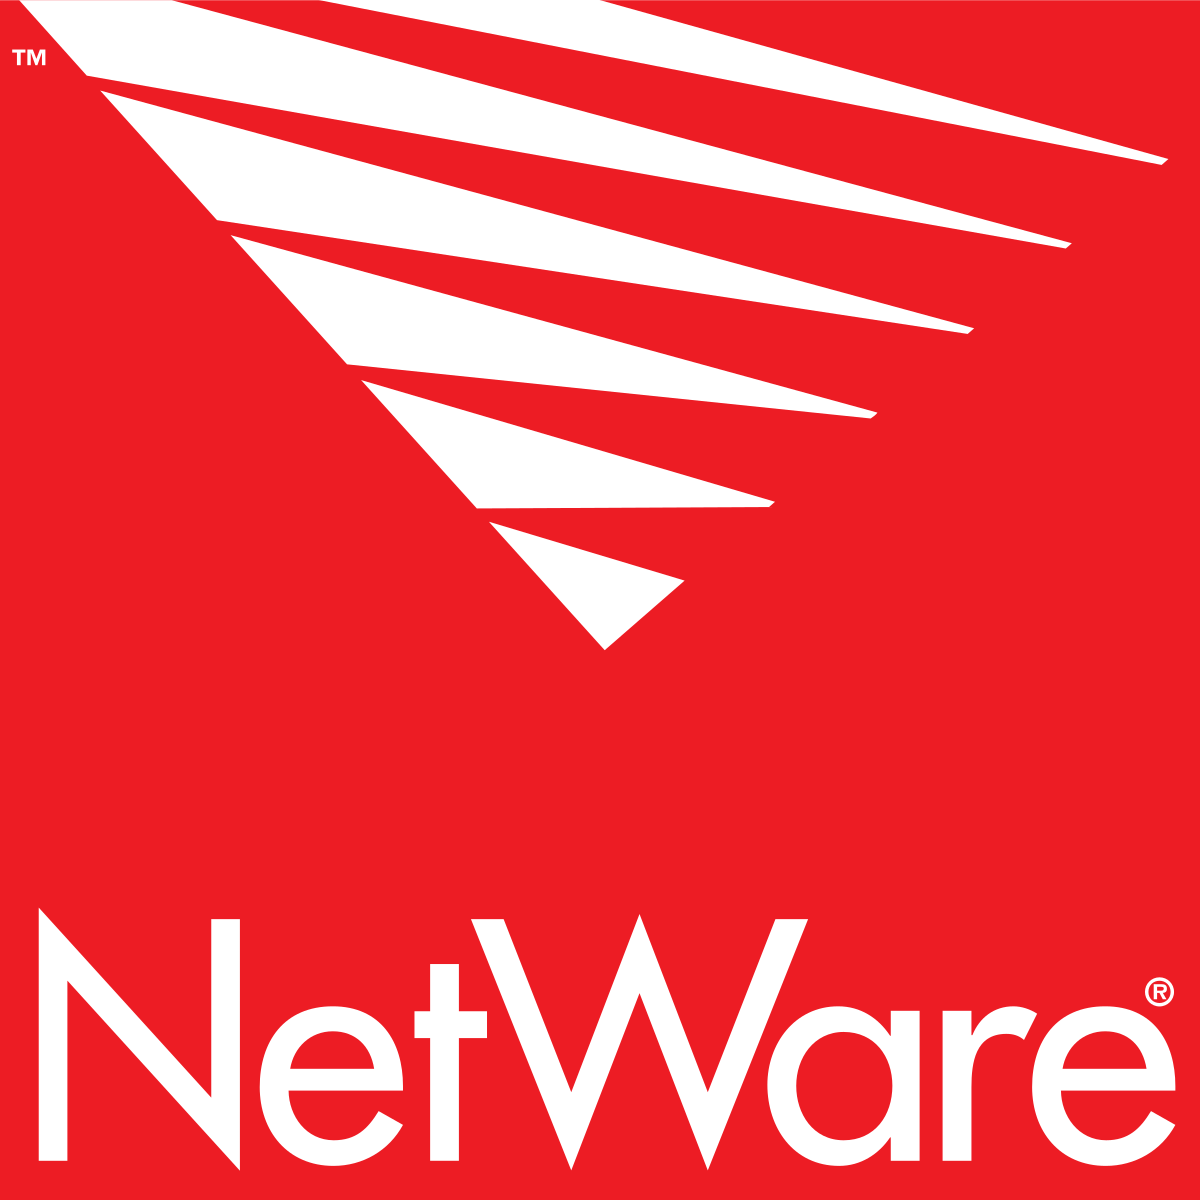 A network icon or a computer connected to a network with a red X mark.